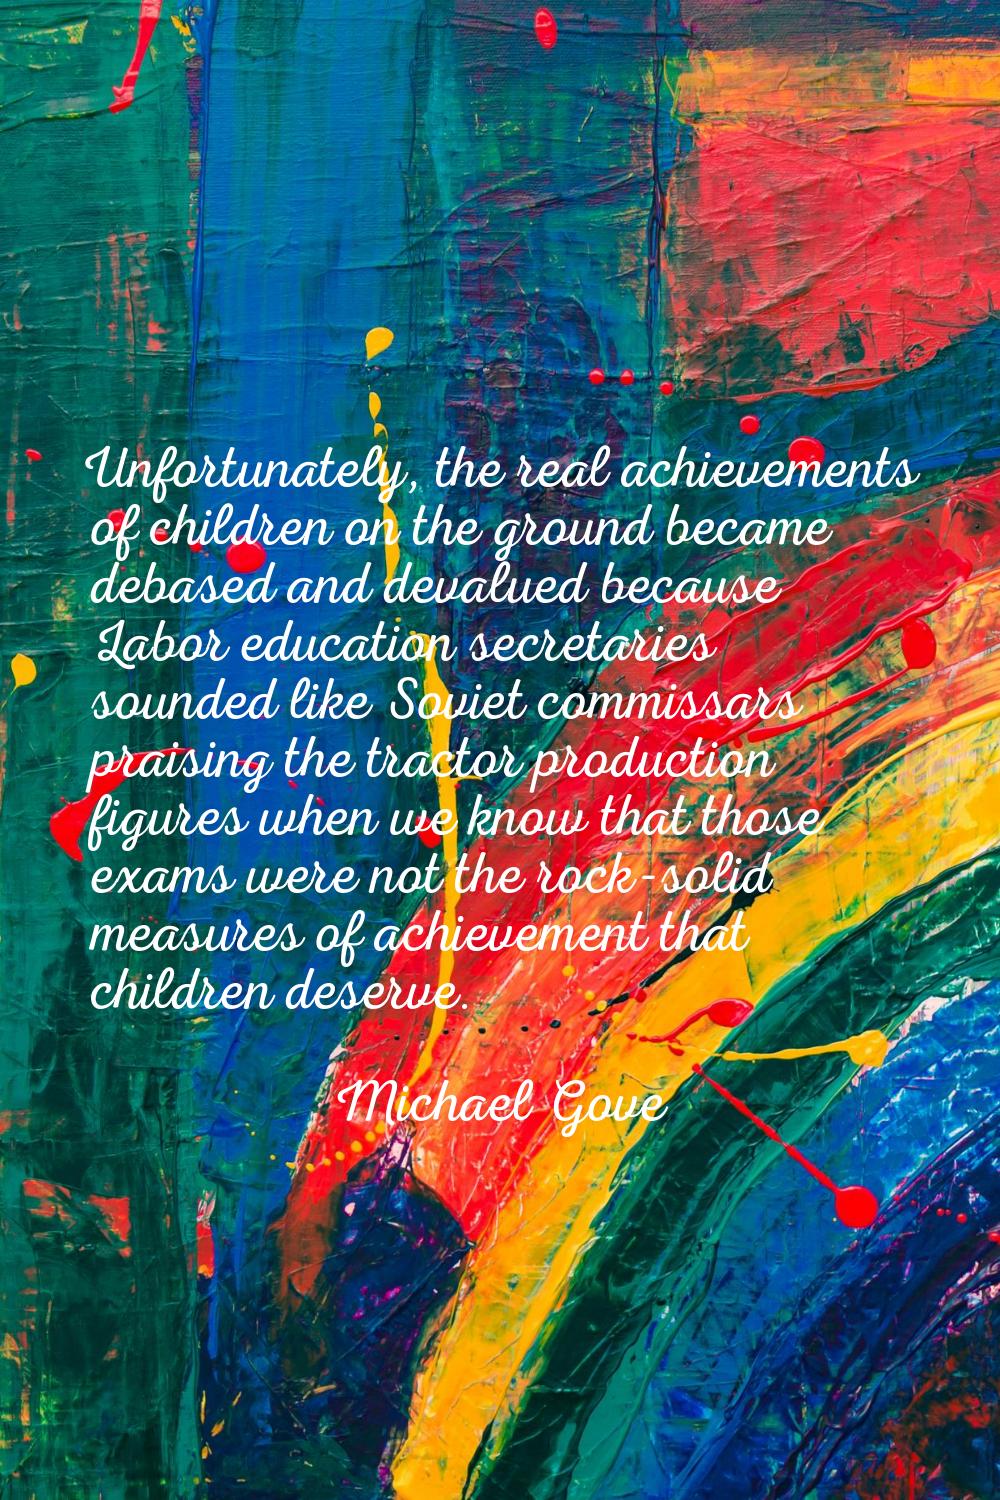 Unfortunately, the real achievements of children on the ground became debased and devalued because 